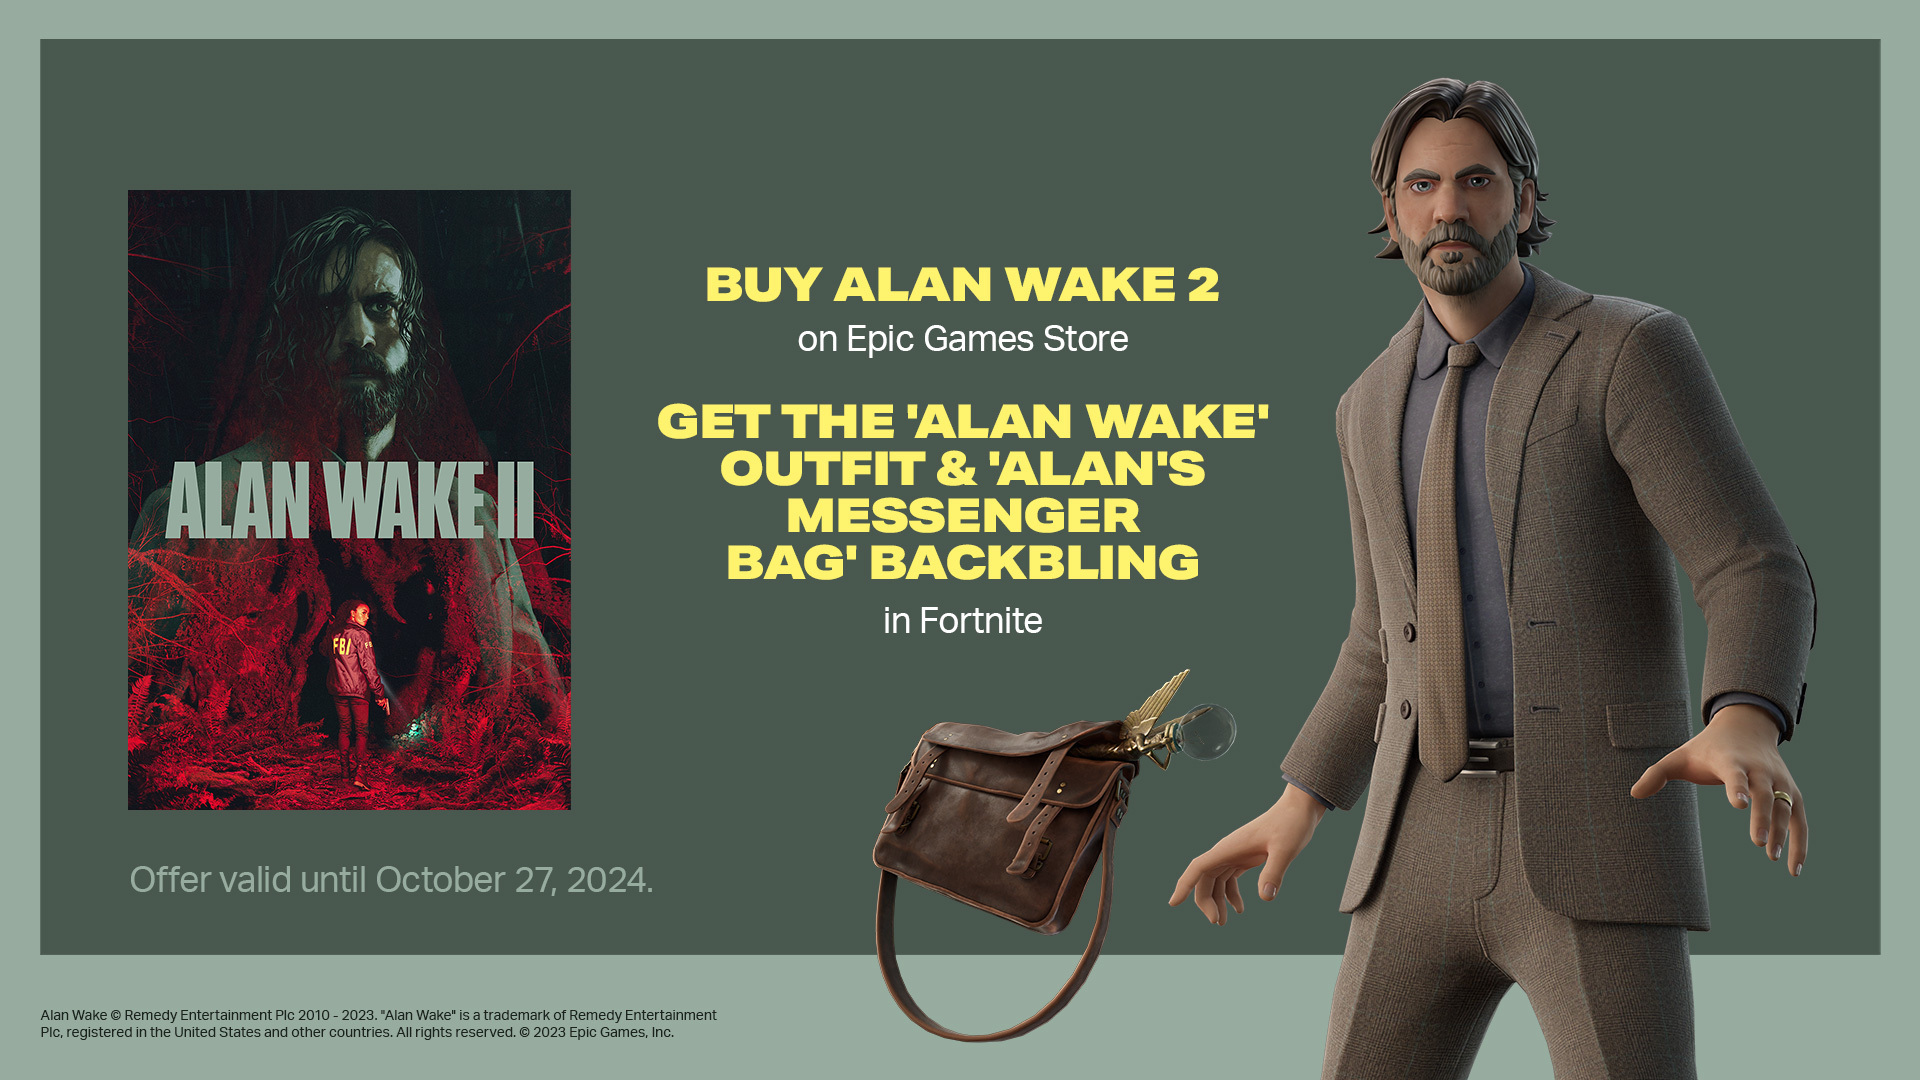 Alan Wake 2 on X: If you buy Alan Wake 2 on the Epic Games Store, you will  get the Alan Wake Outfit and Alan's Messenger Bag Back Bling in Fortnite.  Pre